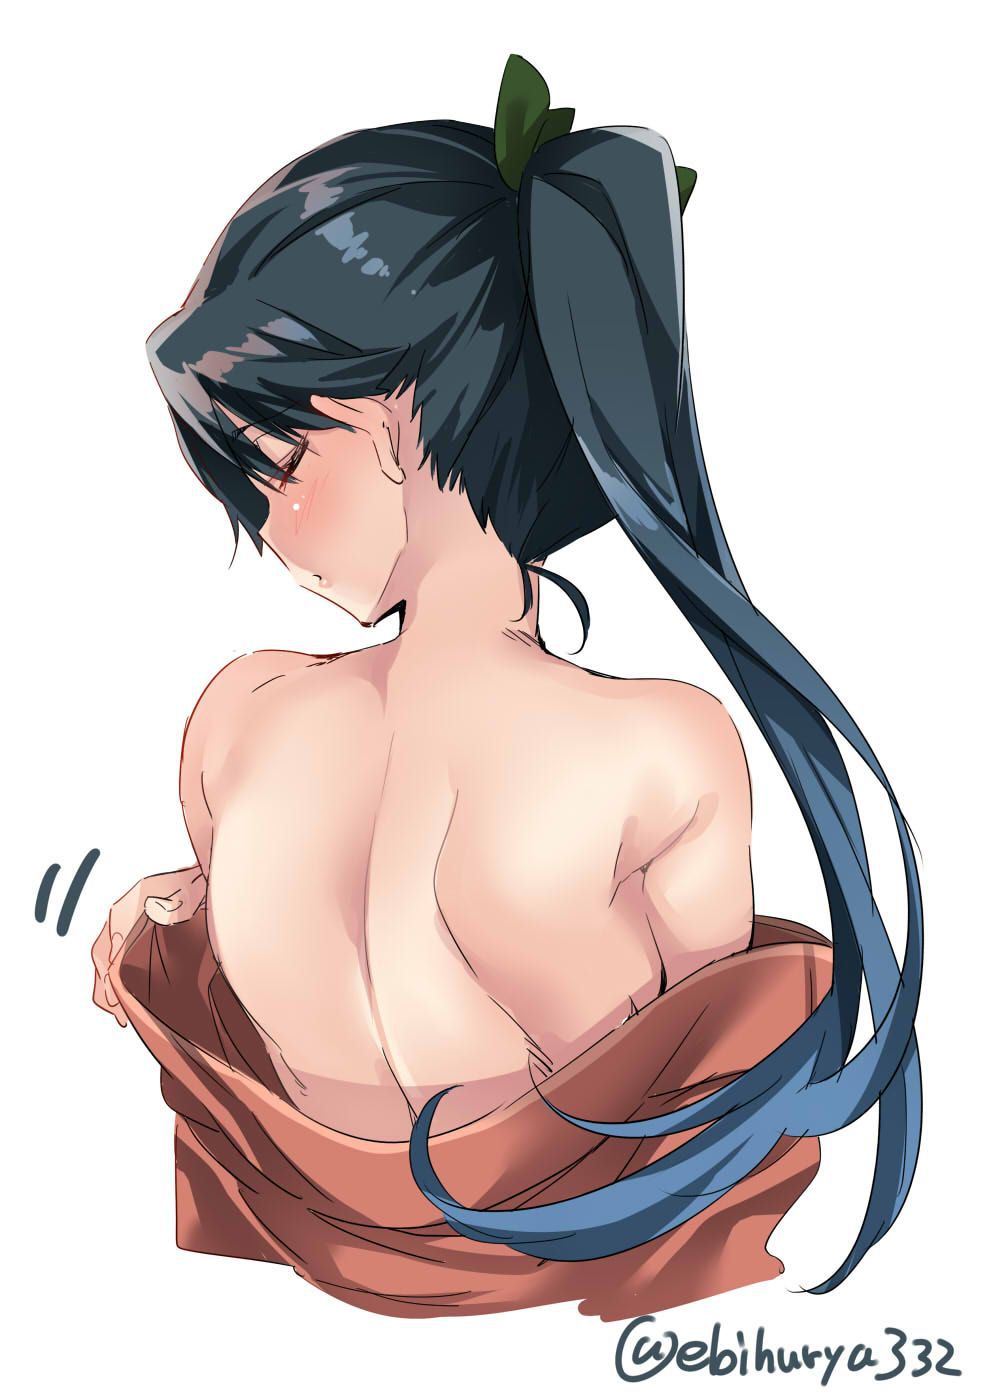 Secondary erotic image of a cute ponytail girl, 24 [ponytail] 29